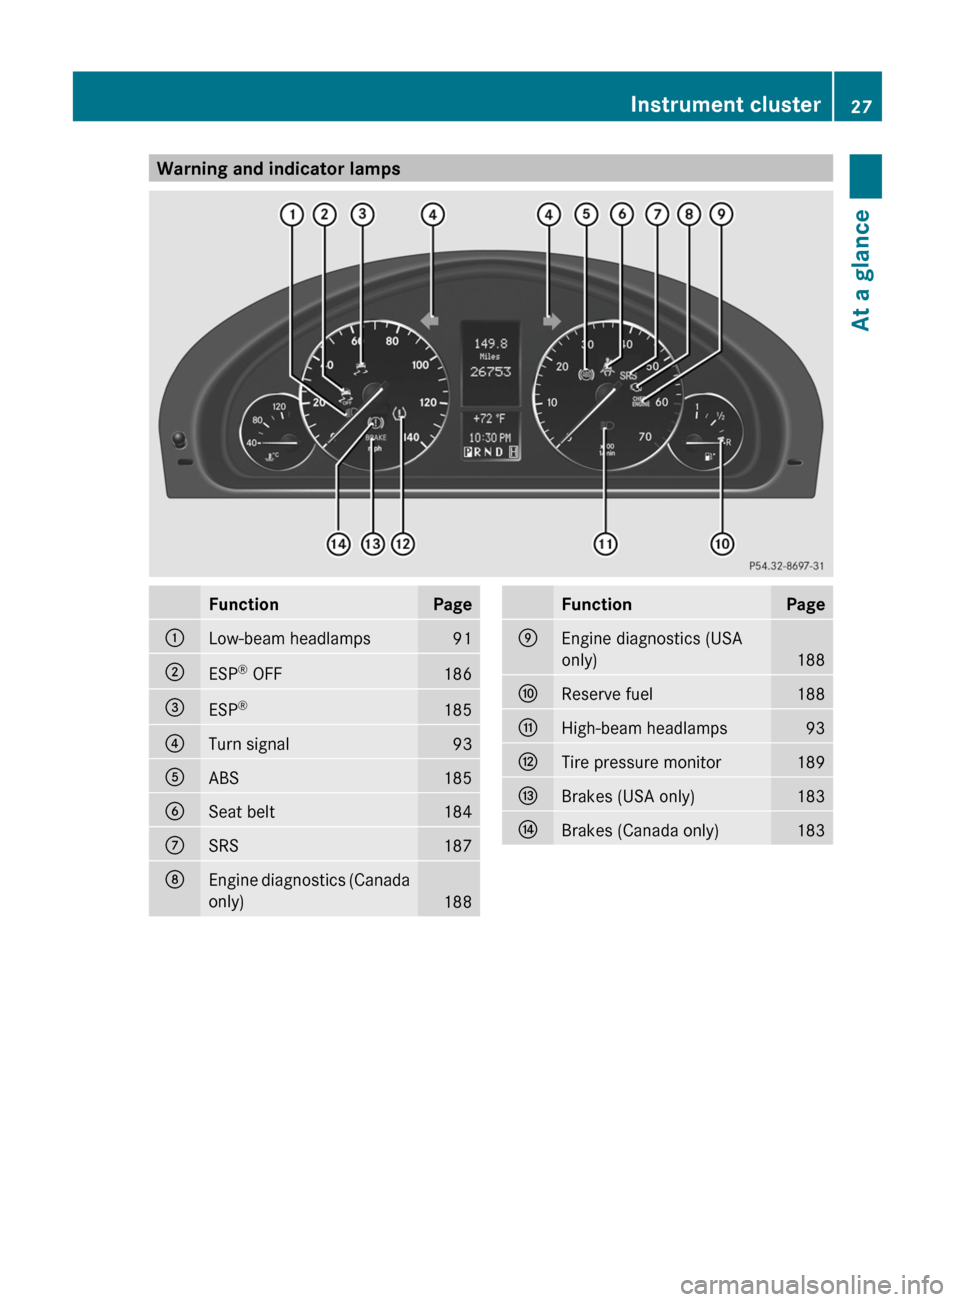 MERCEDES-BENZ G550 2011 W463 User Guide Warning and indicator lampsFunctionPage:Low-beam headlamps91;ESP®
 OFF186=ESP ®185?Turn signal93AABS185BSeat belt184CSRS187DEngine diagnostics (Canada
only)
188
FunctionPageEEngine diagnostics (USA
